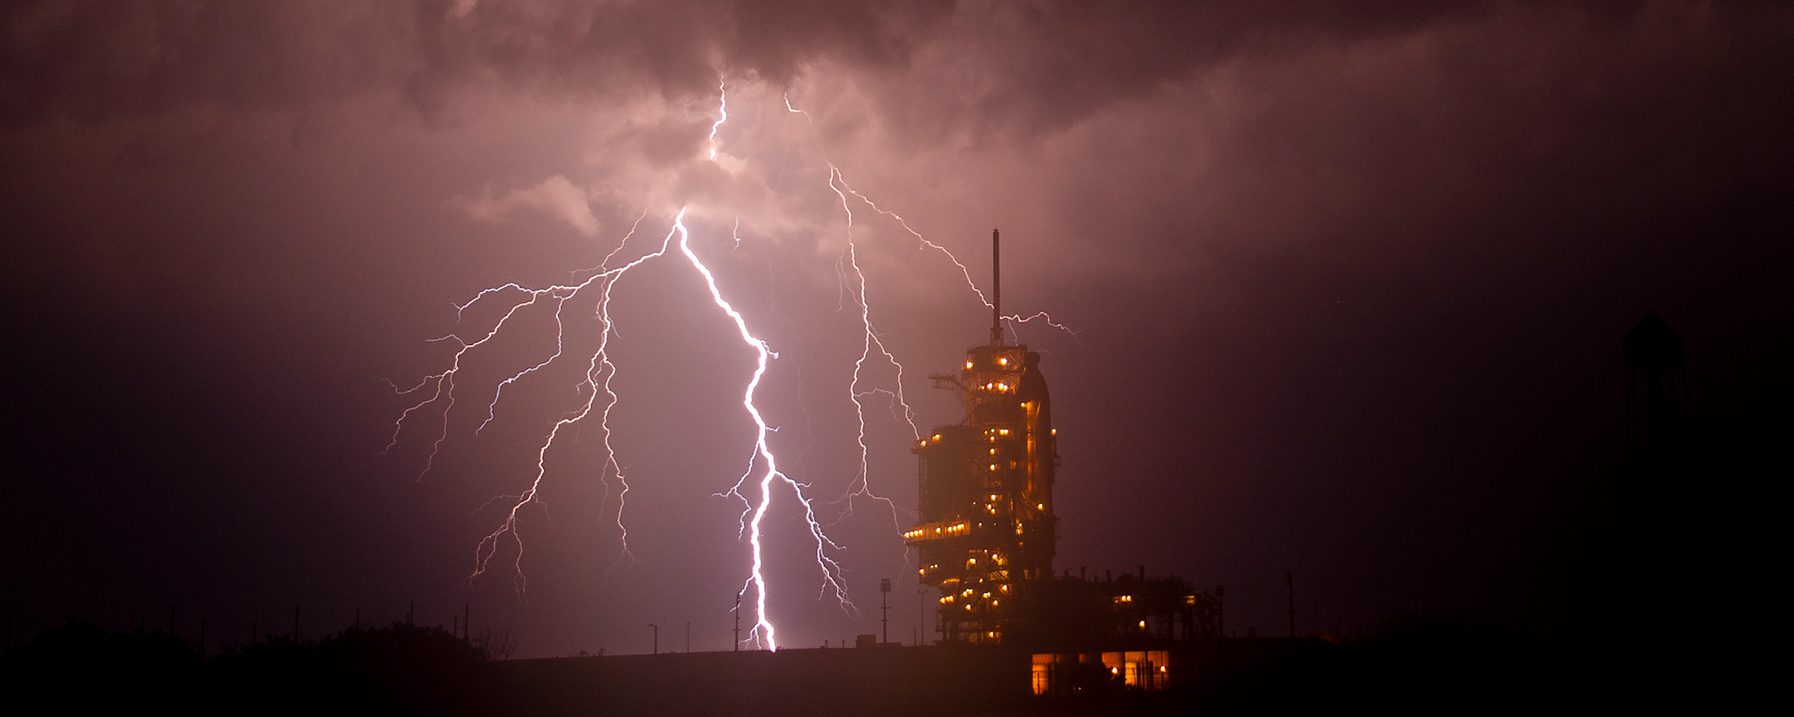 Lightning Near Space Shuttle Endeavour on the Launch Pad